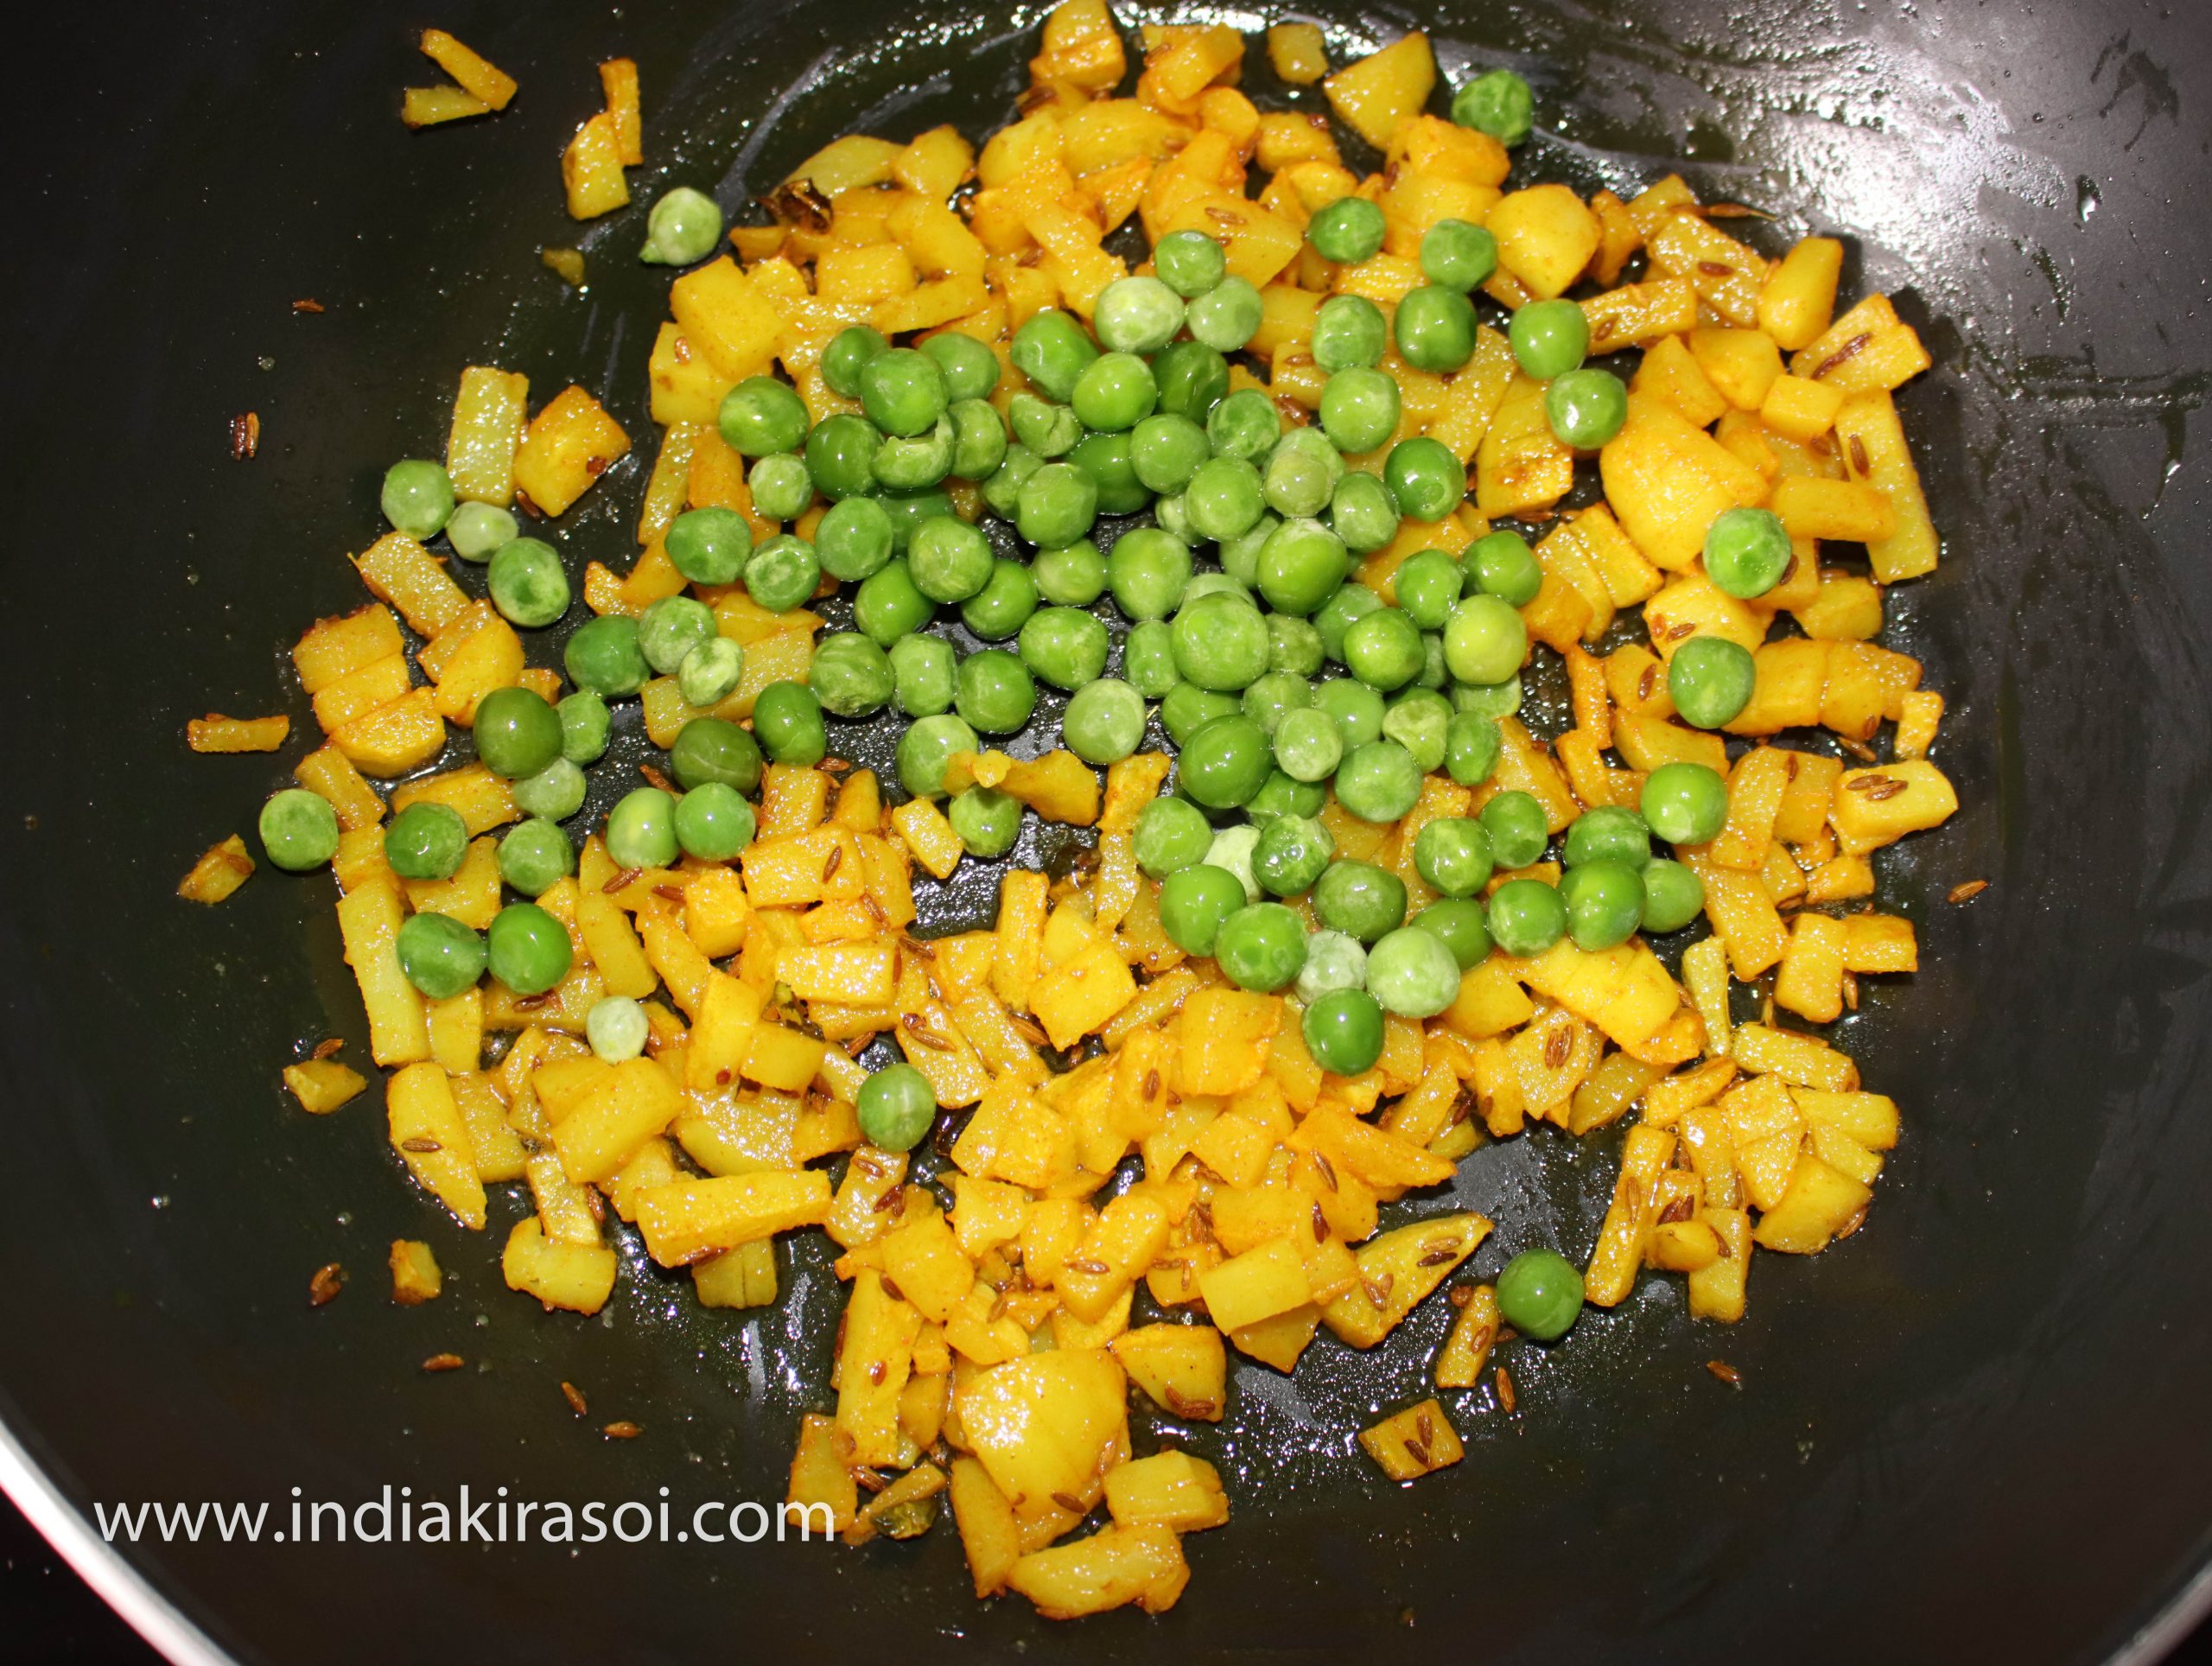 Once the potatoes are cooked add boiled green peas to the potatoes.